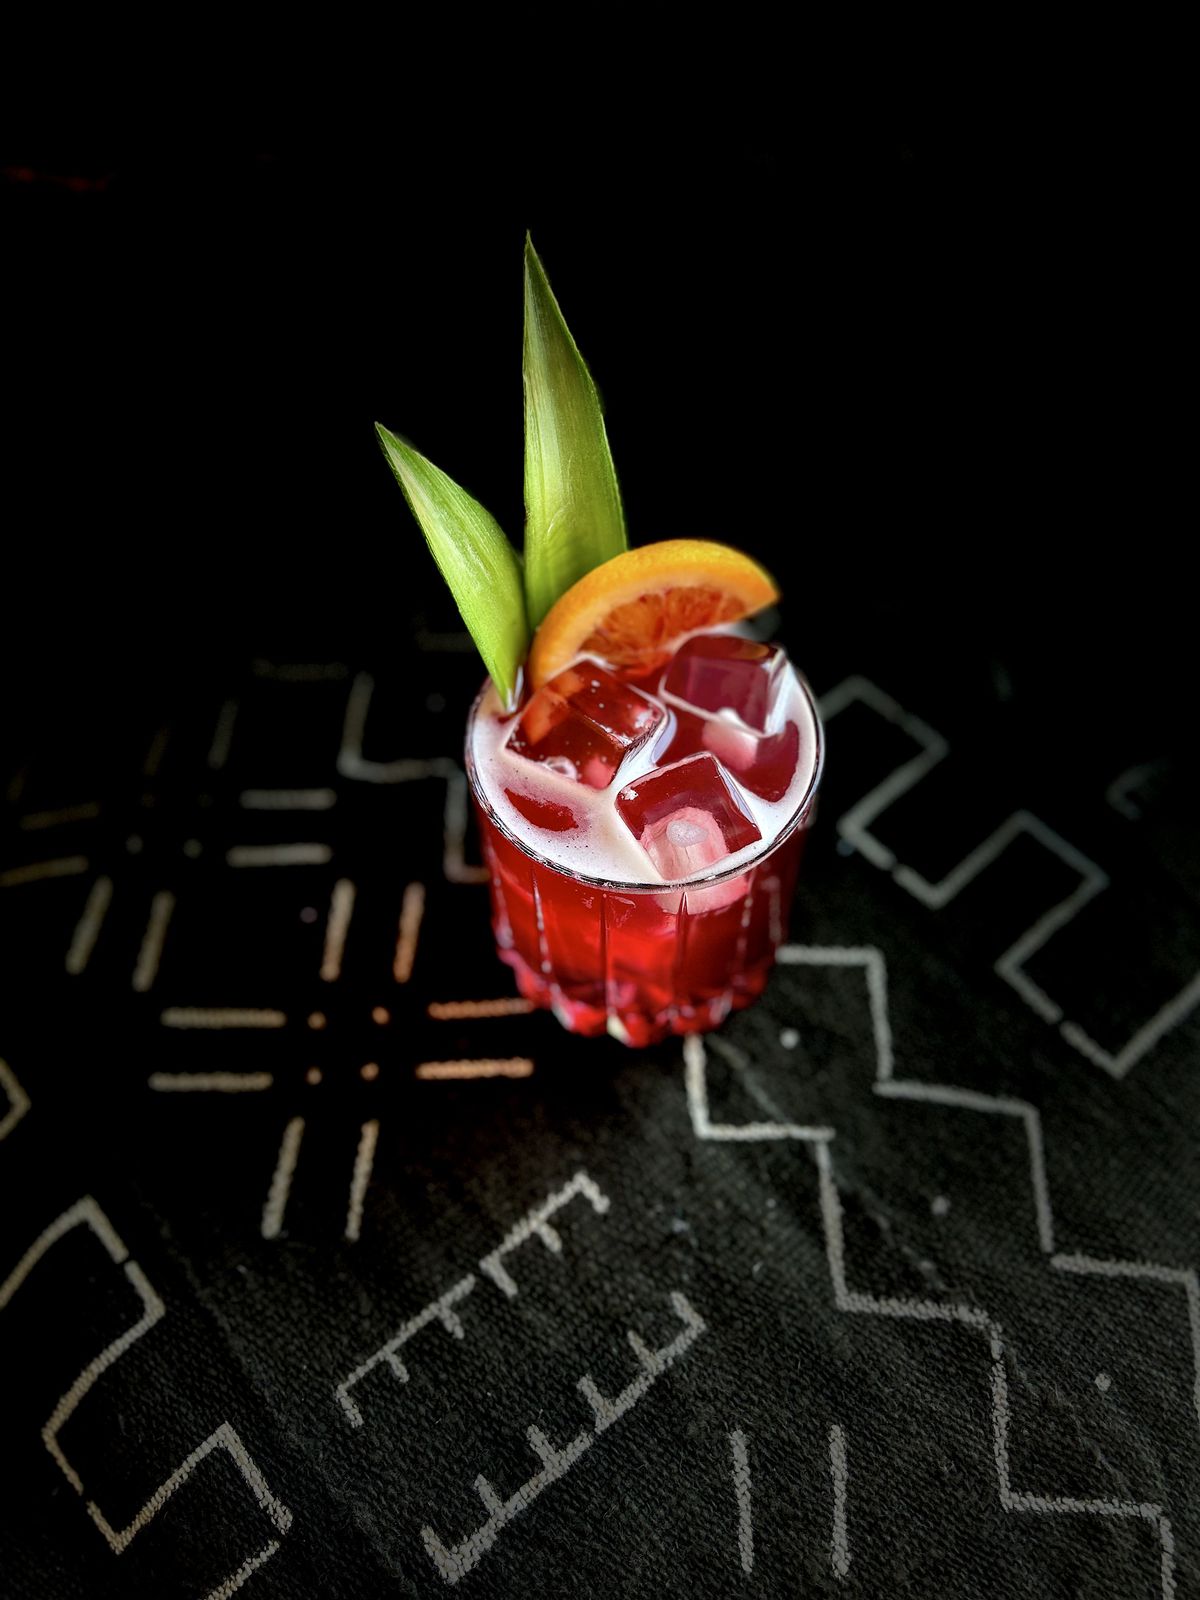 A red cocktail with large ice cubes, two green pointy leaves, and a grapefruit slice on a black patterned surface.